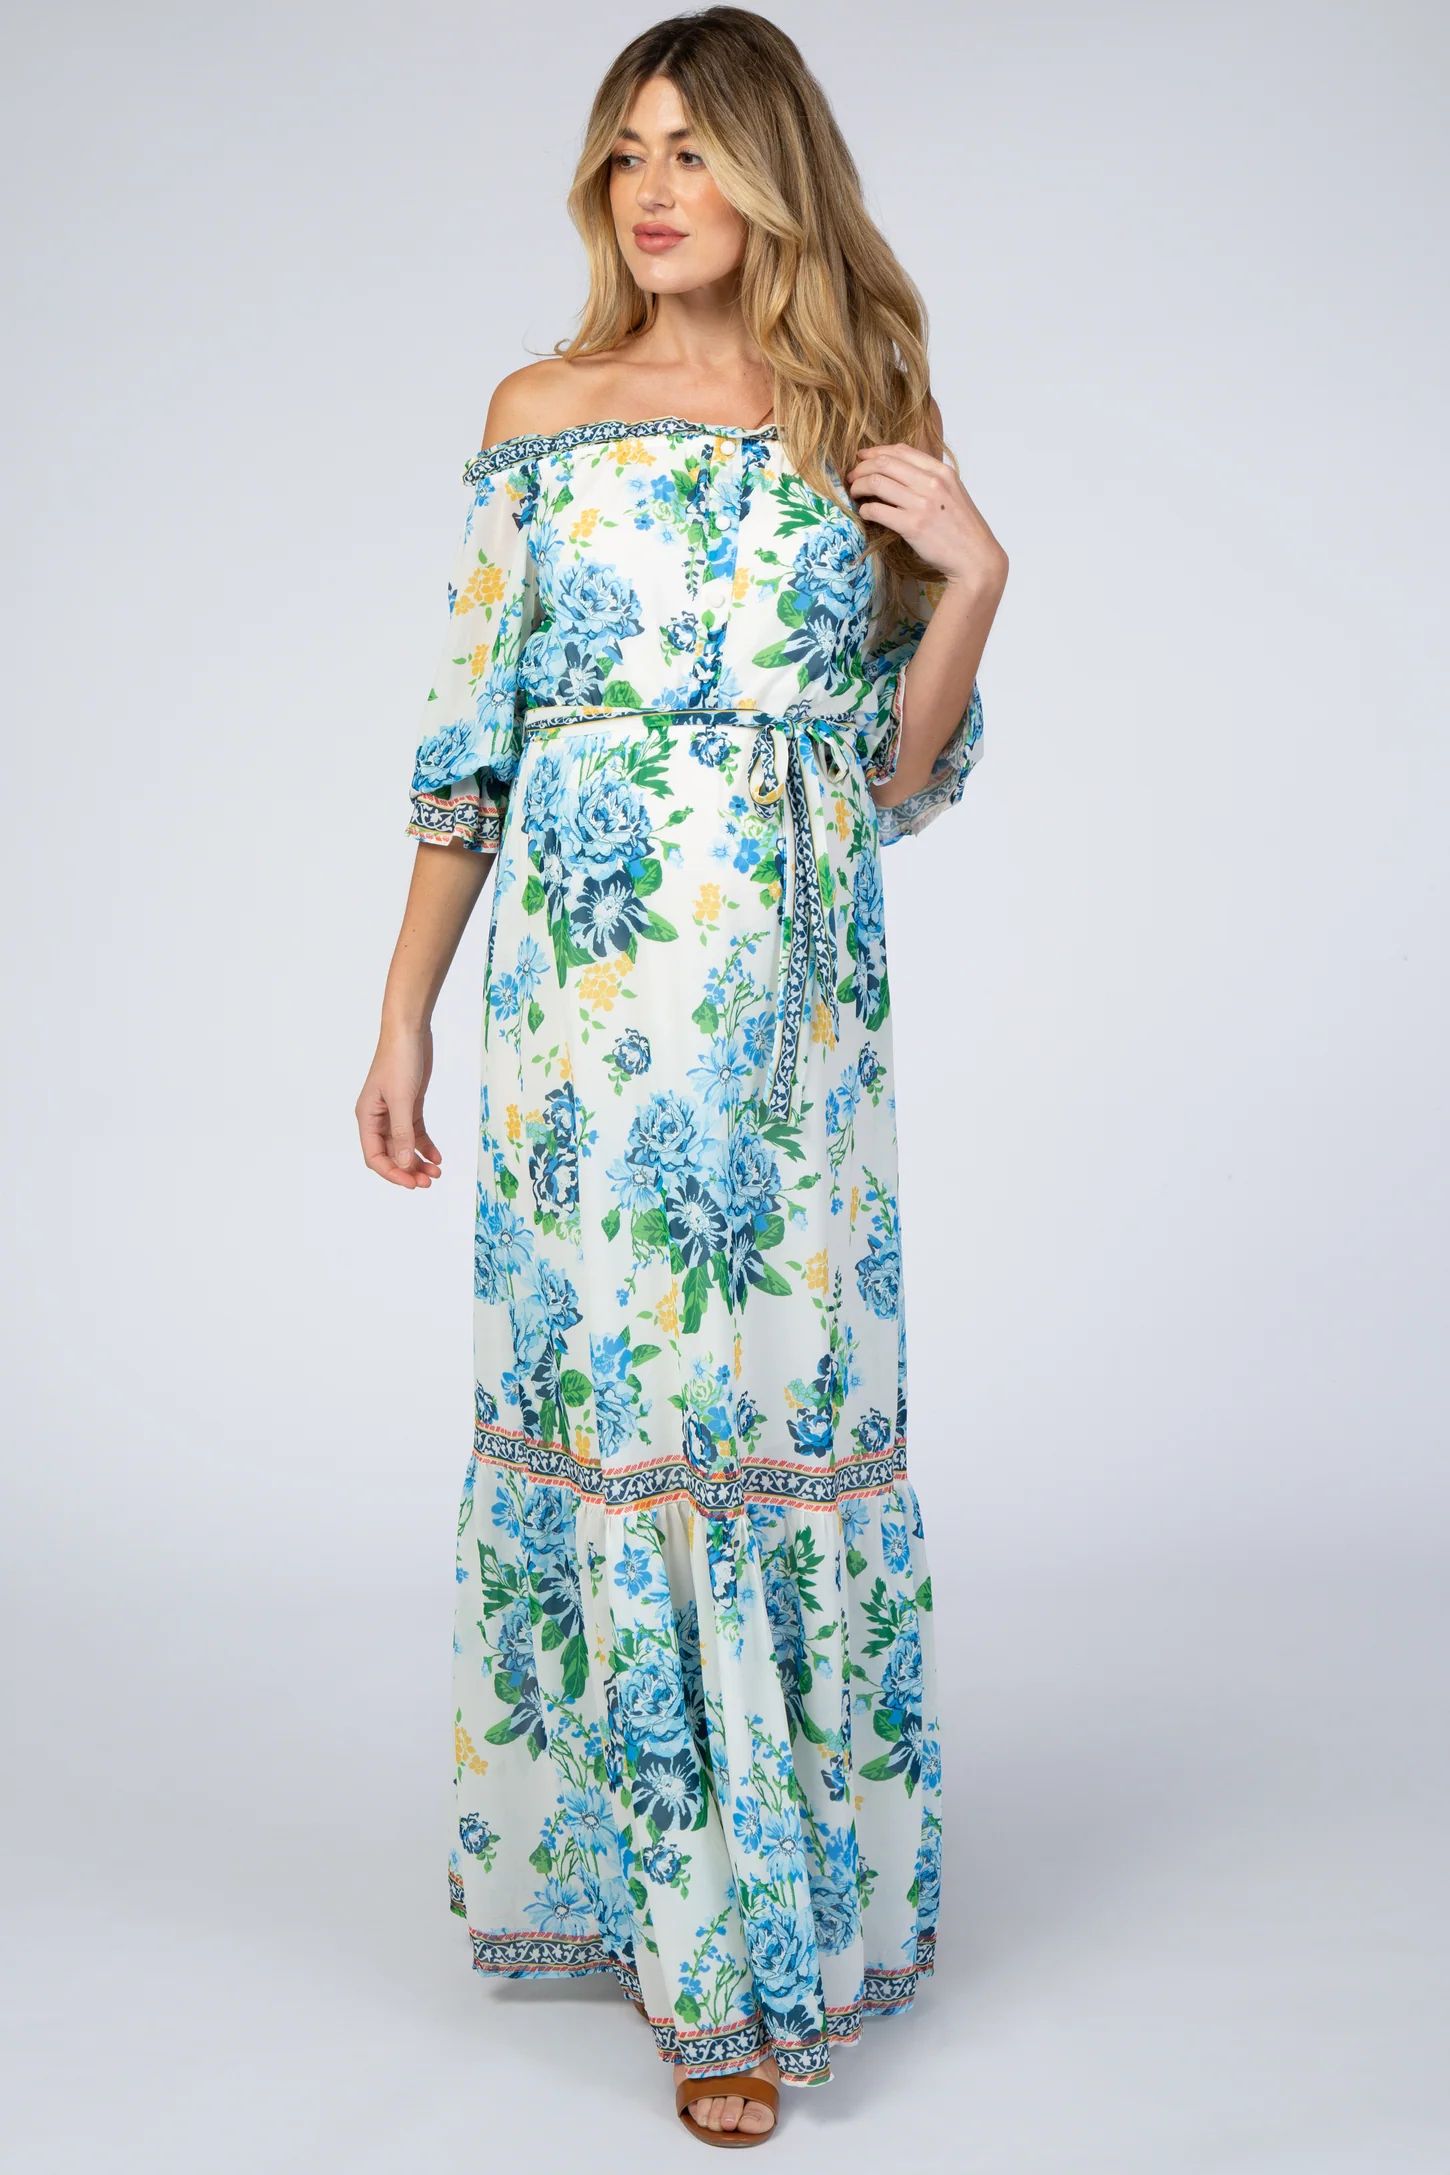 Ivory Floral Off Shoulder Maternity Maxi Dress | PinkBlush Maternity